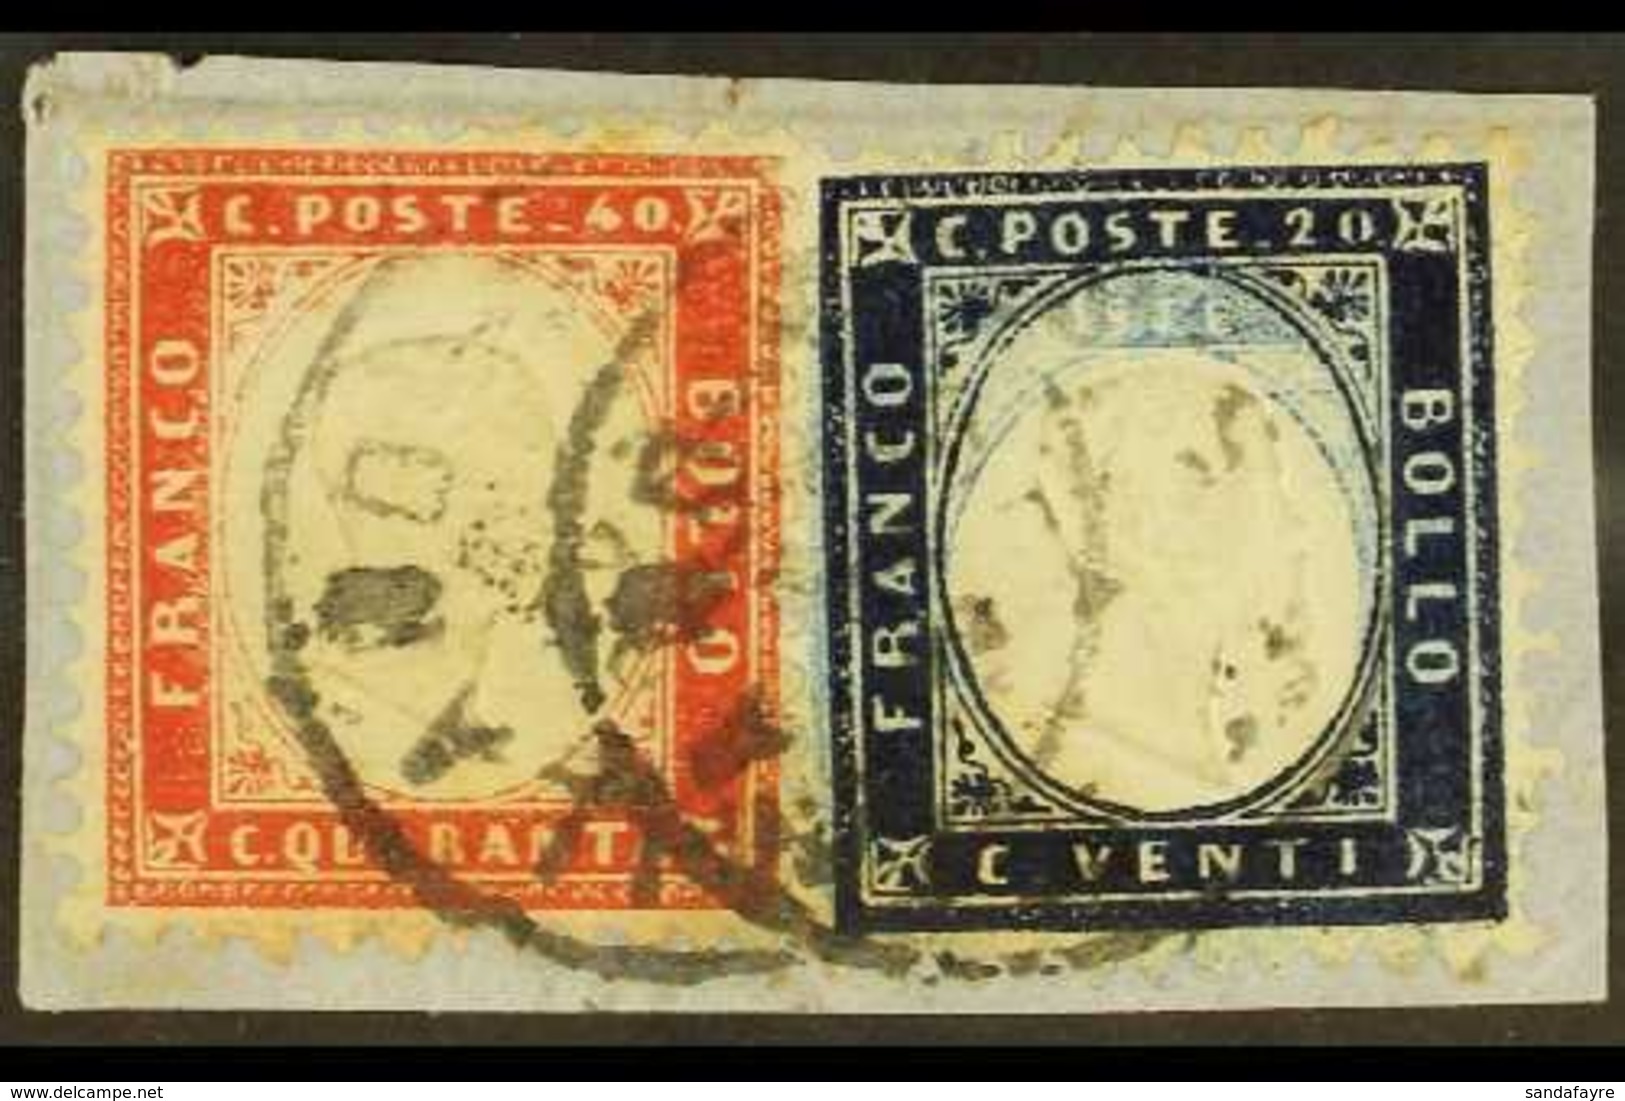 1862 20c Indigo & 40c Deep Red (SG 2a & 3b, Sassone 2 & 3), Fine Used On Small Piece Tied By "Milano" Cds's, The 20c Wit - Ohne Zuordnung